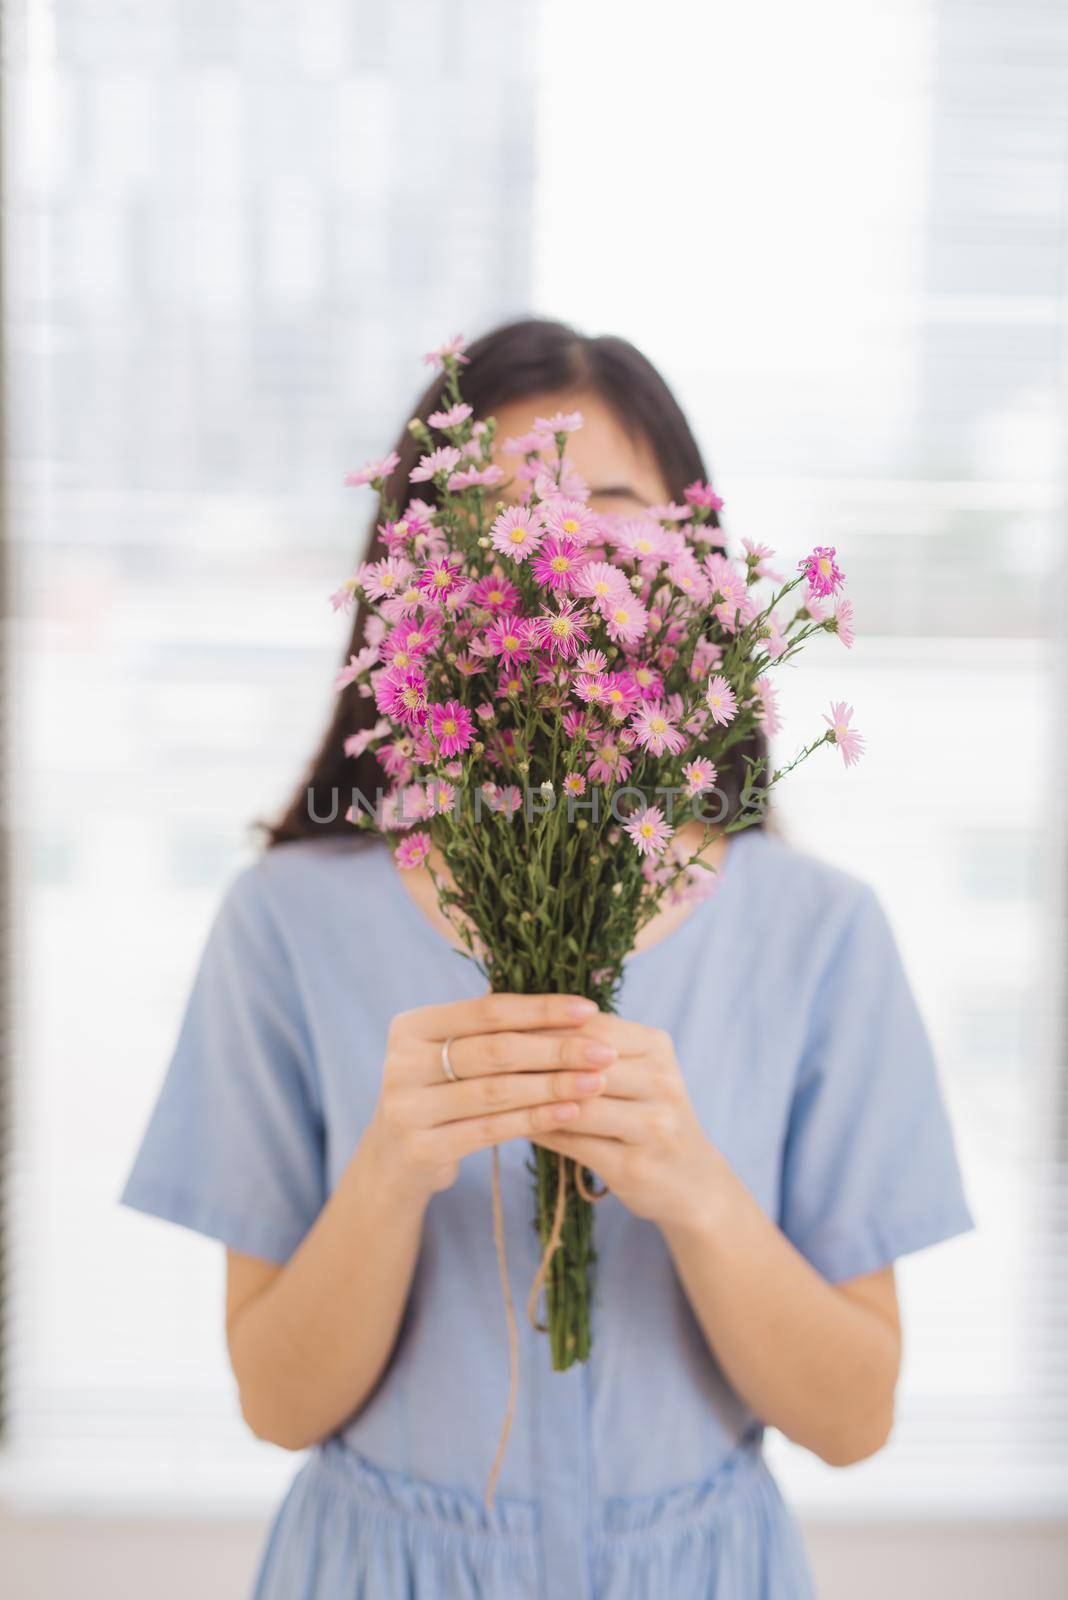 Studio shot of happiness woman receiving pretty flowers by makidotvn